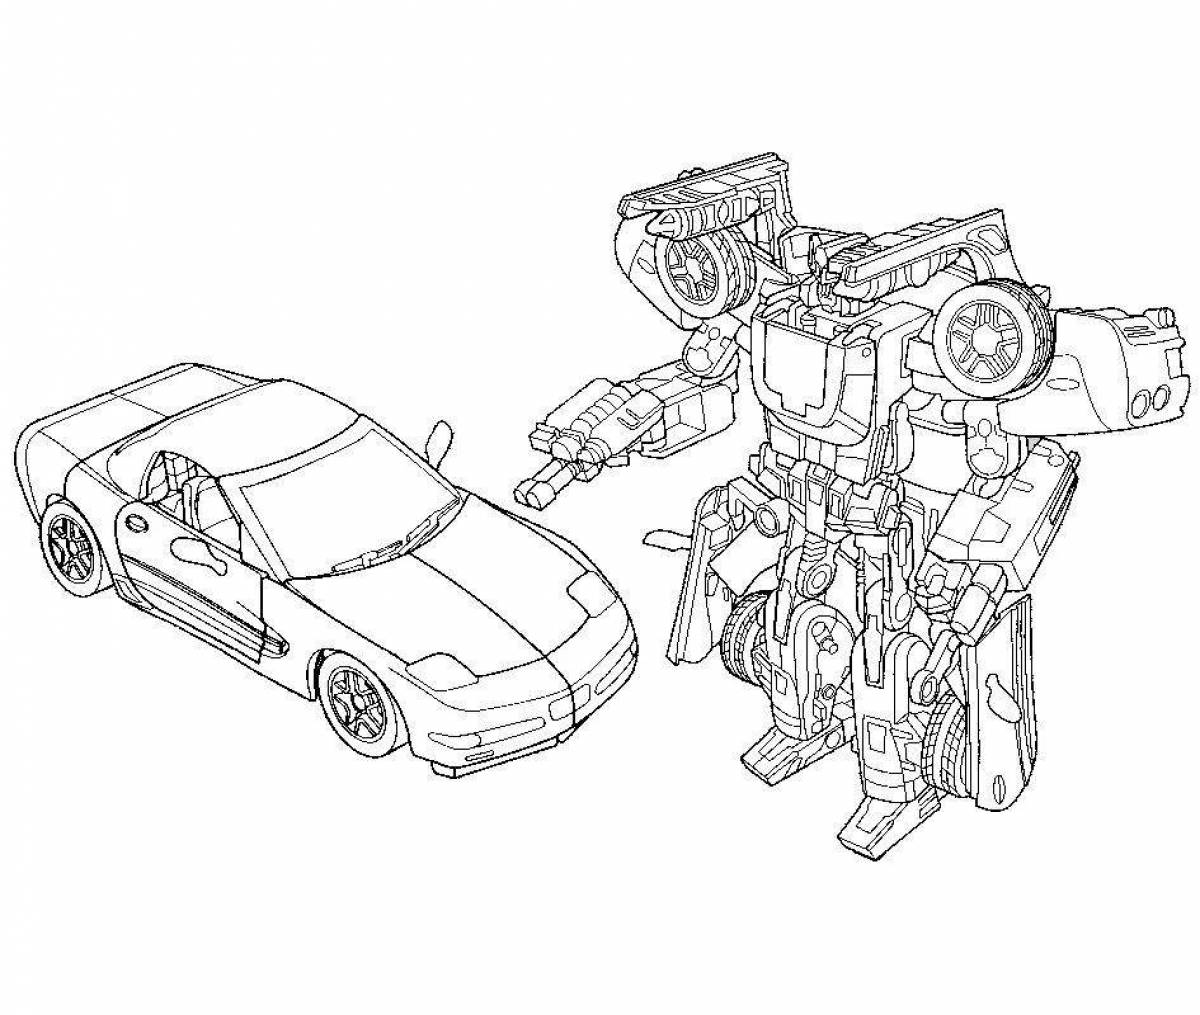 Lovely carbot coloring page